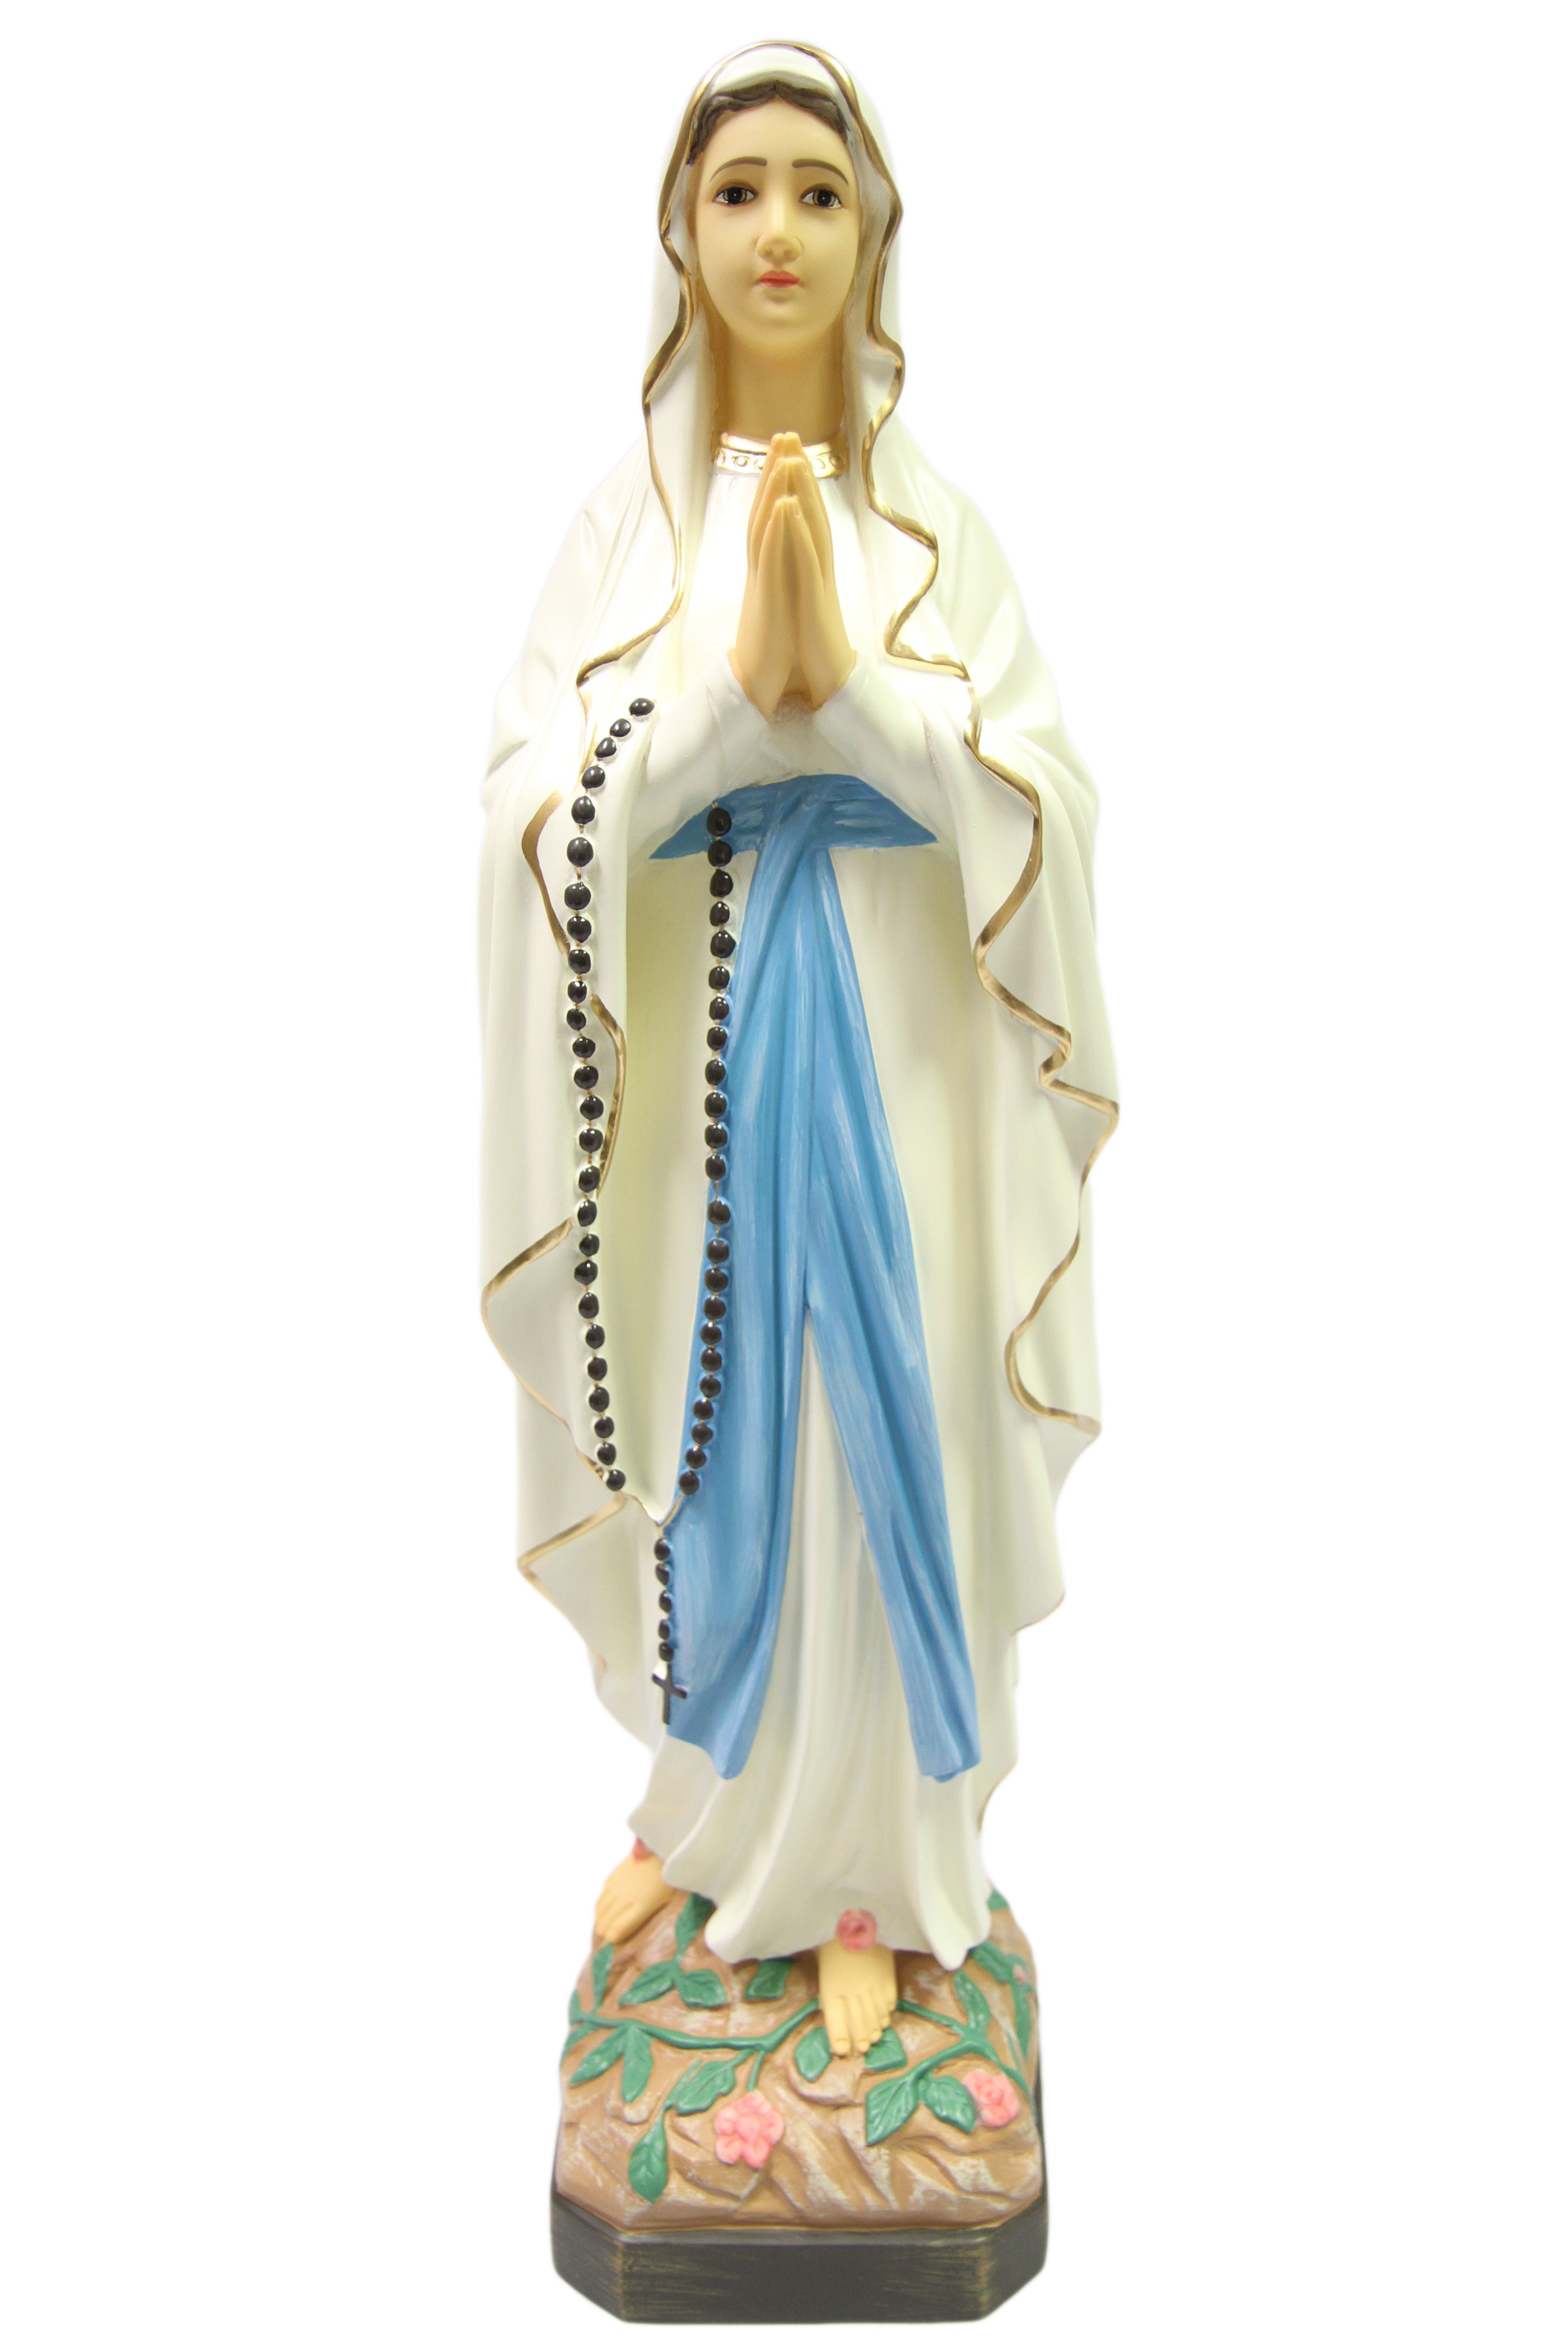 25 Inch Our Lady of Lourdes Virgin Mary Catholic Statue Religious Sculpture Made in Italy